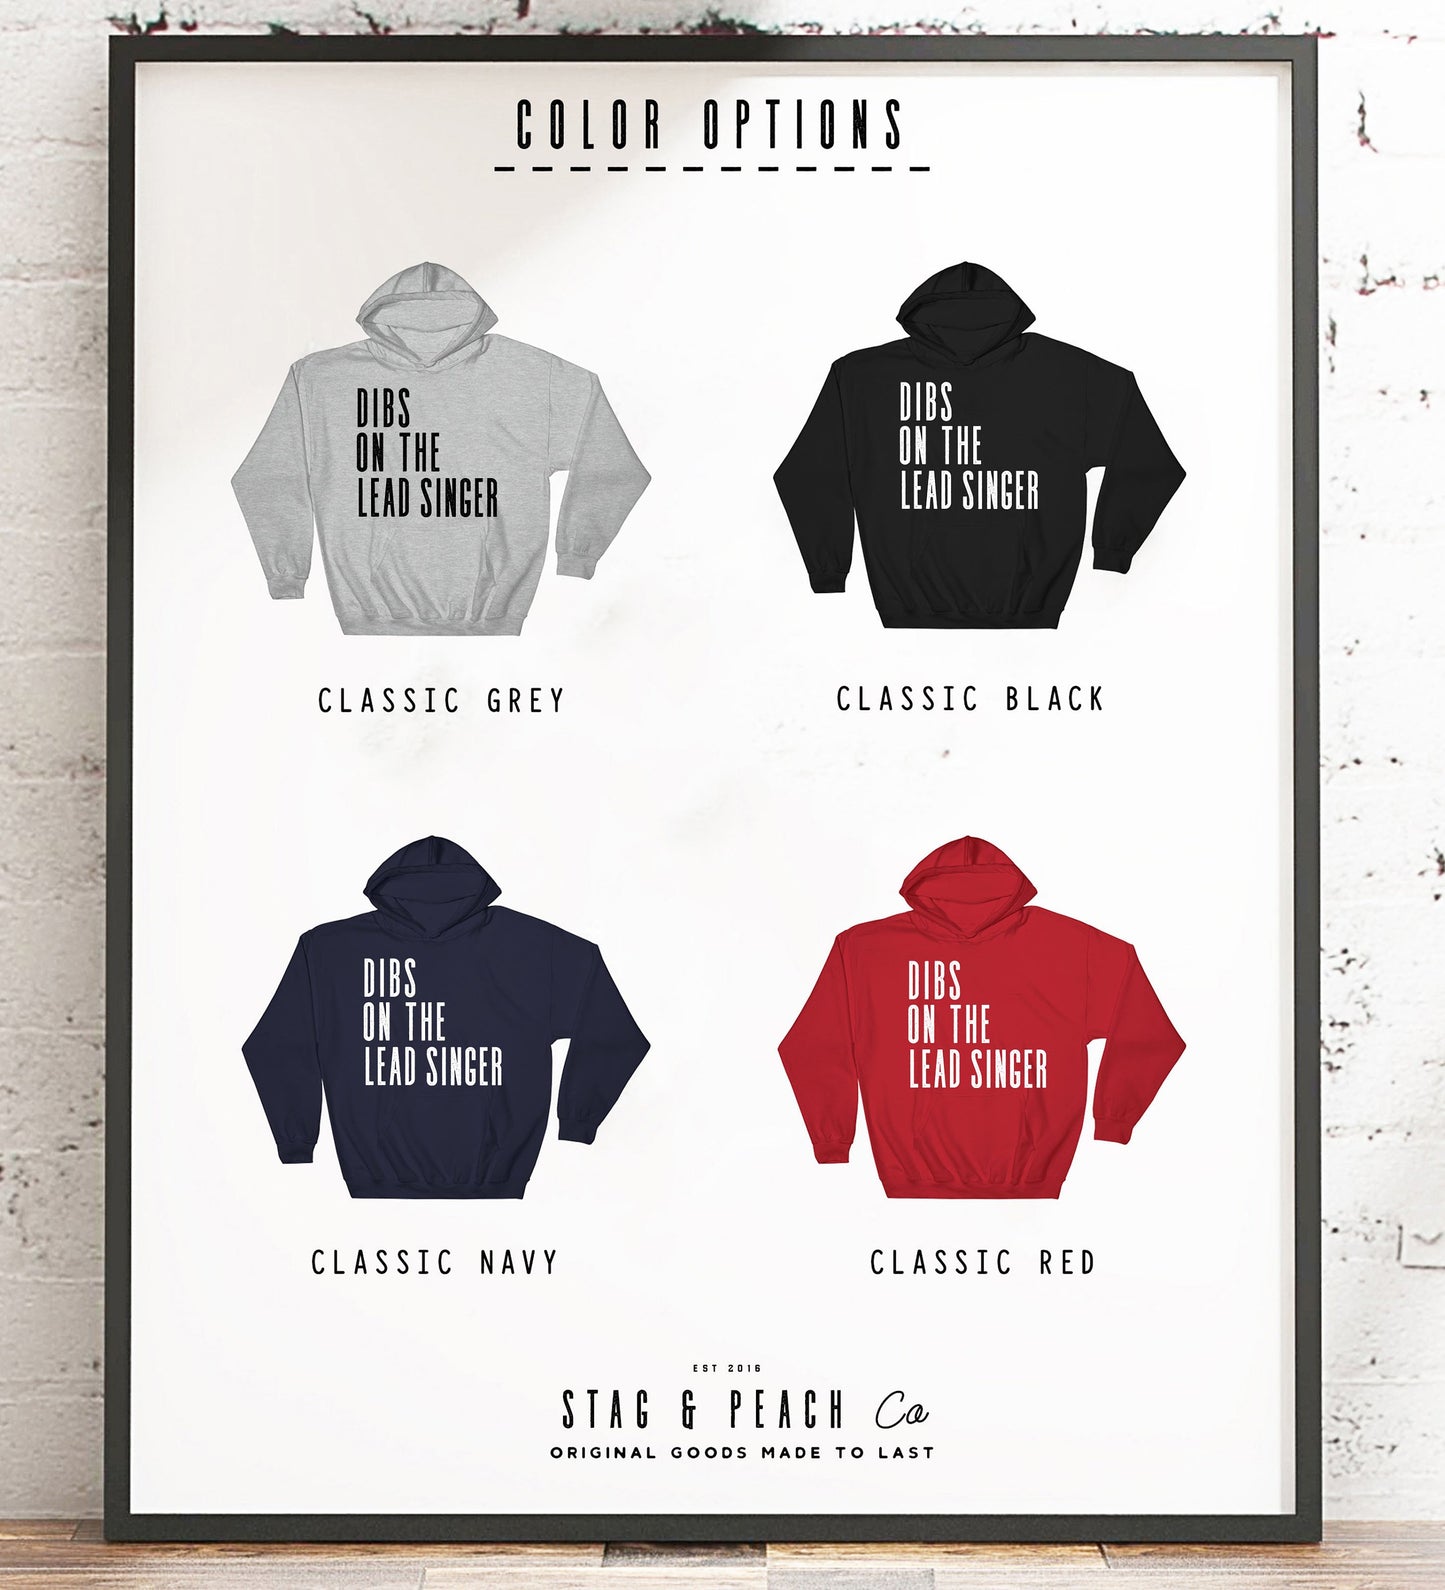 Dibs On The Lead Singer Hoodie - Band shirt, Concert shirt, Concert shirts, Lead band singer, Music festival shirt, Concert groupie